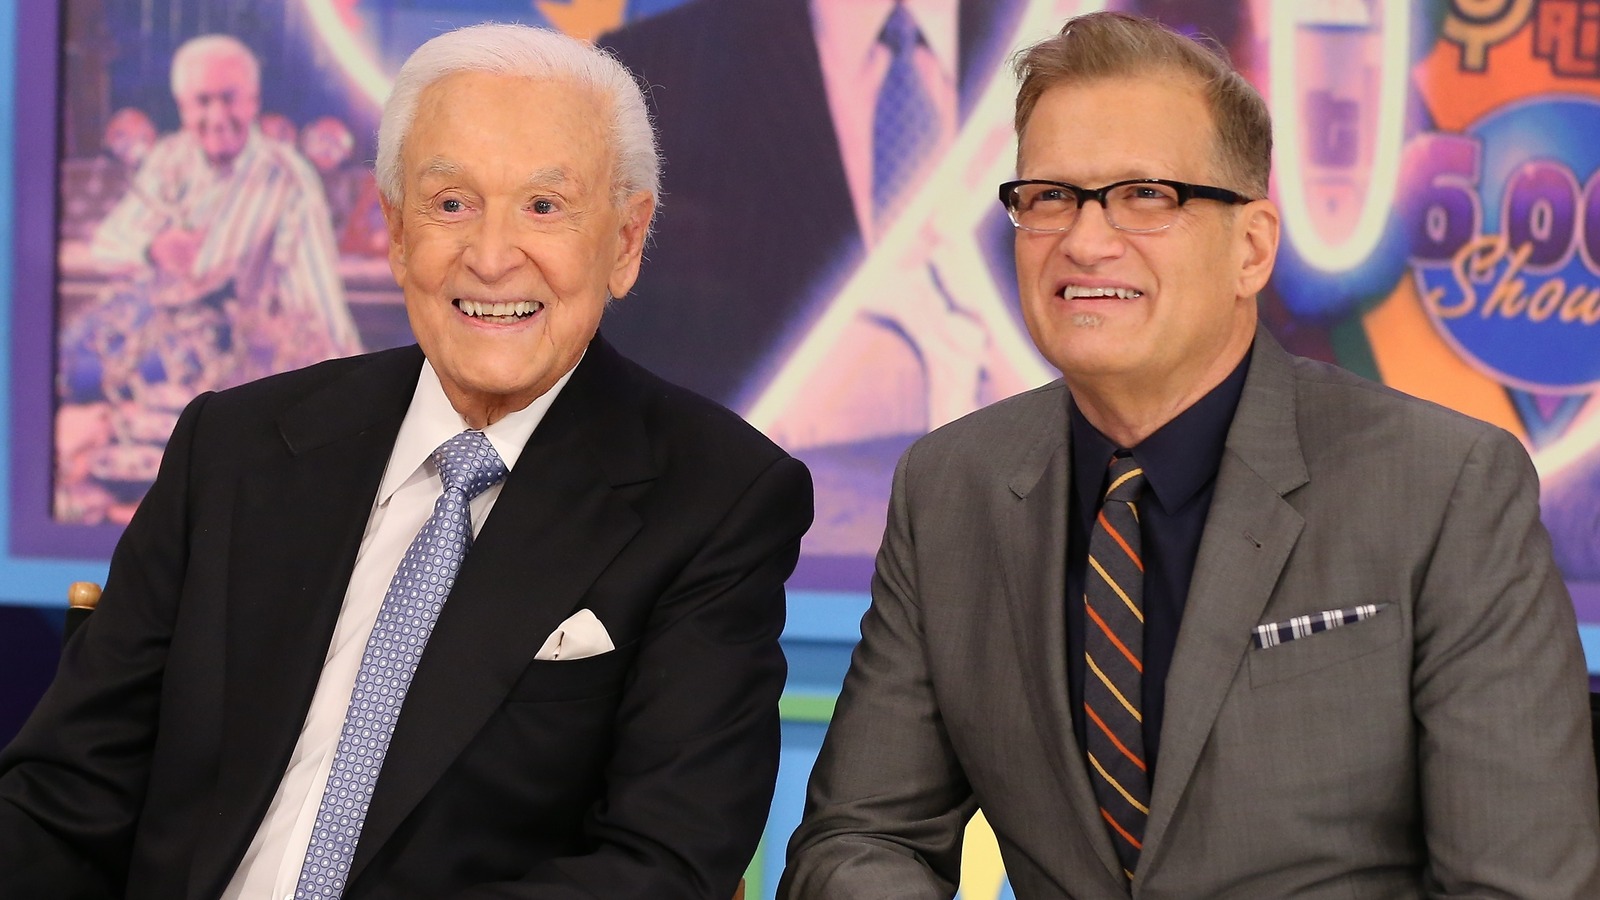 The Price Is Right Host Drew Carey Posts Loving Tribute To His